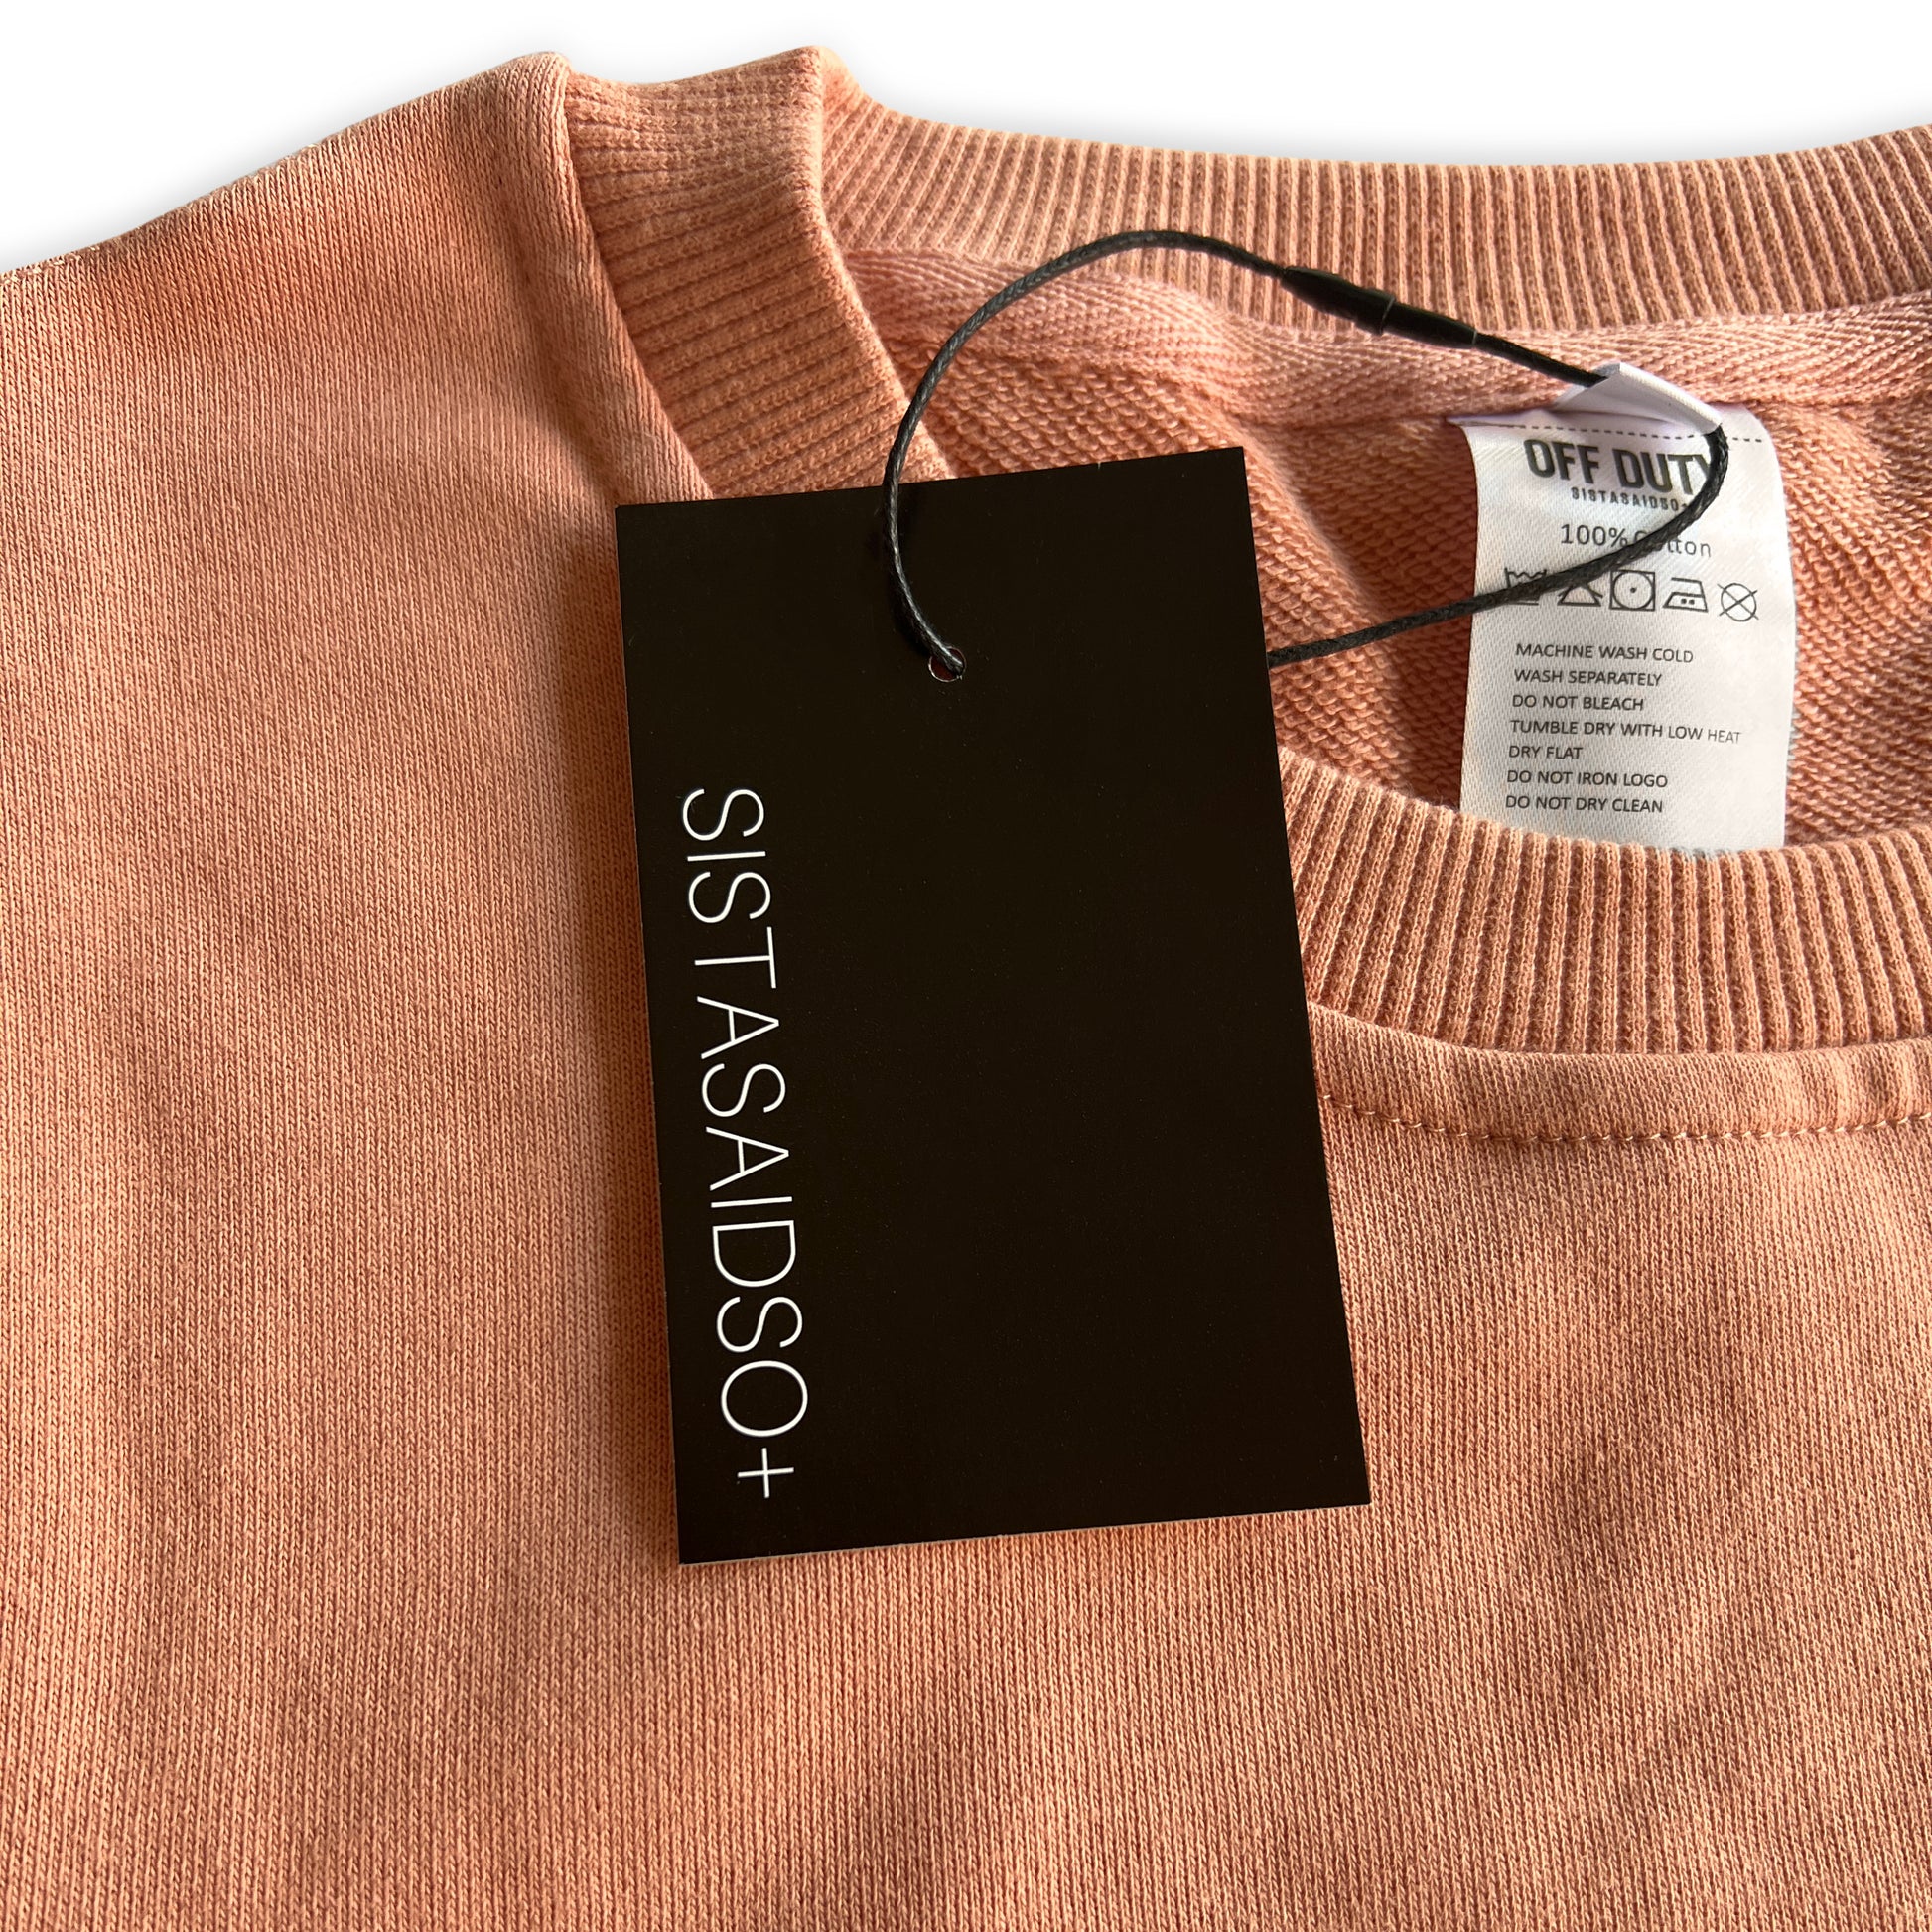 OFF DUTY™️ Unisex Peach nurse women's Sweater and nurse accessory from Sistasaidso close up